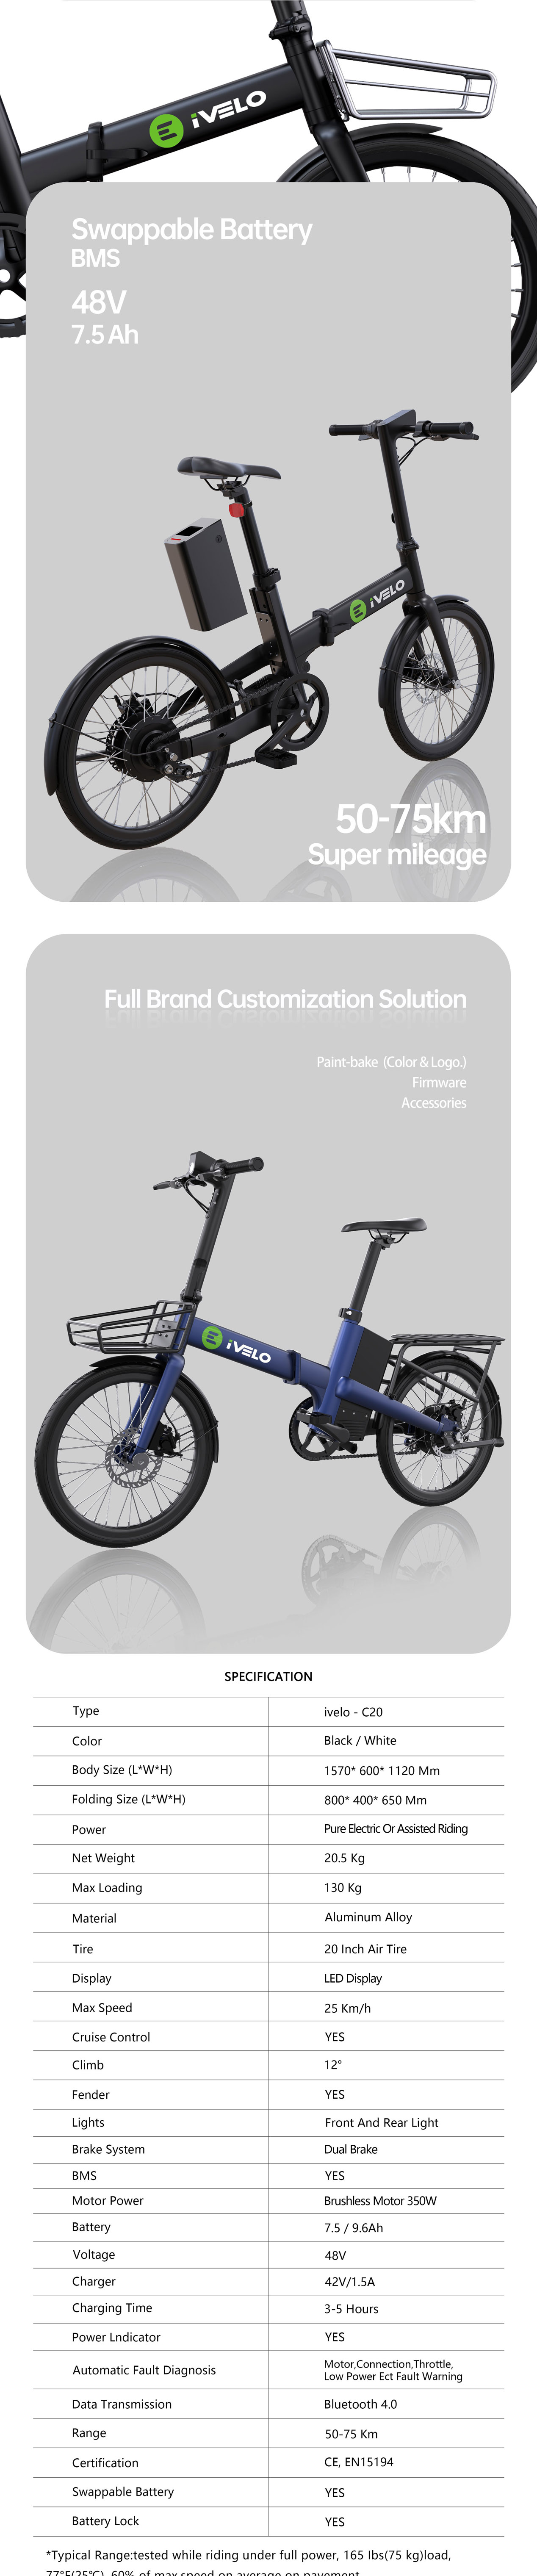 fitrider C20 electric bicycle